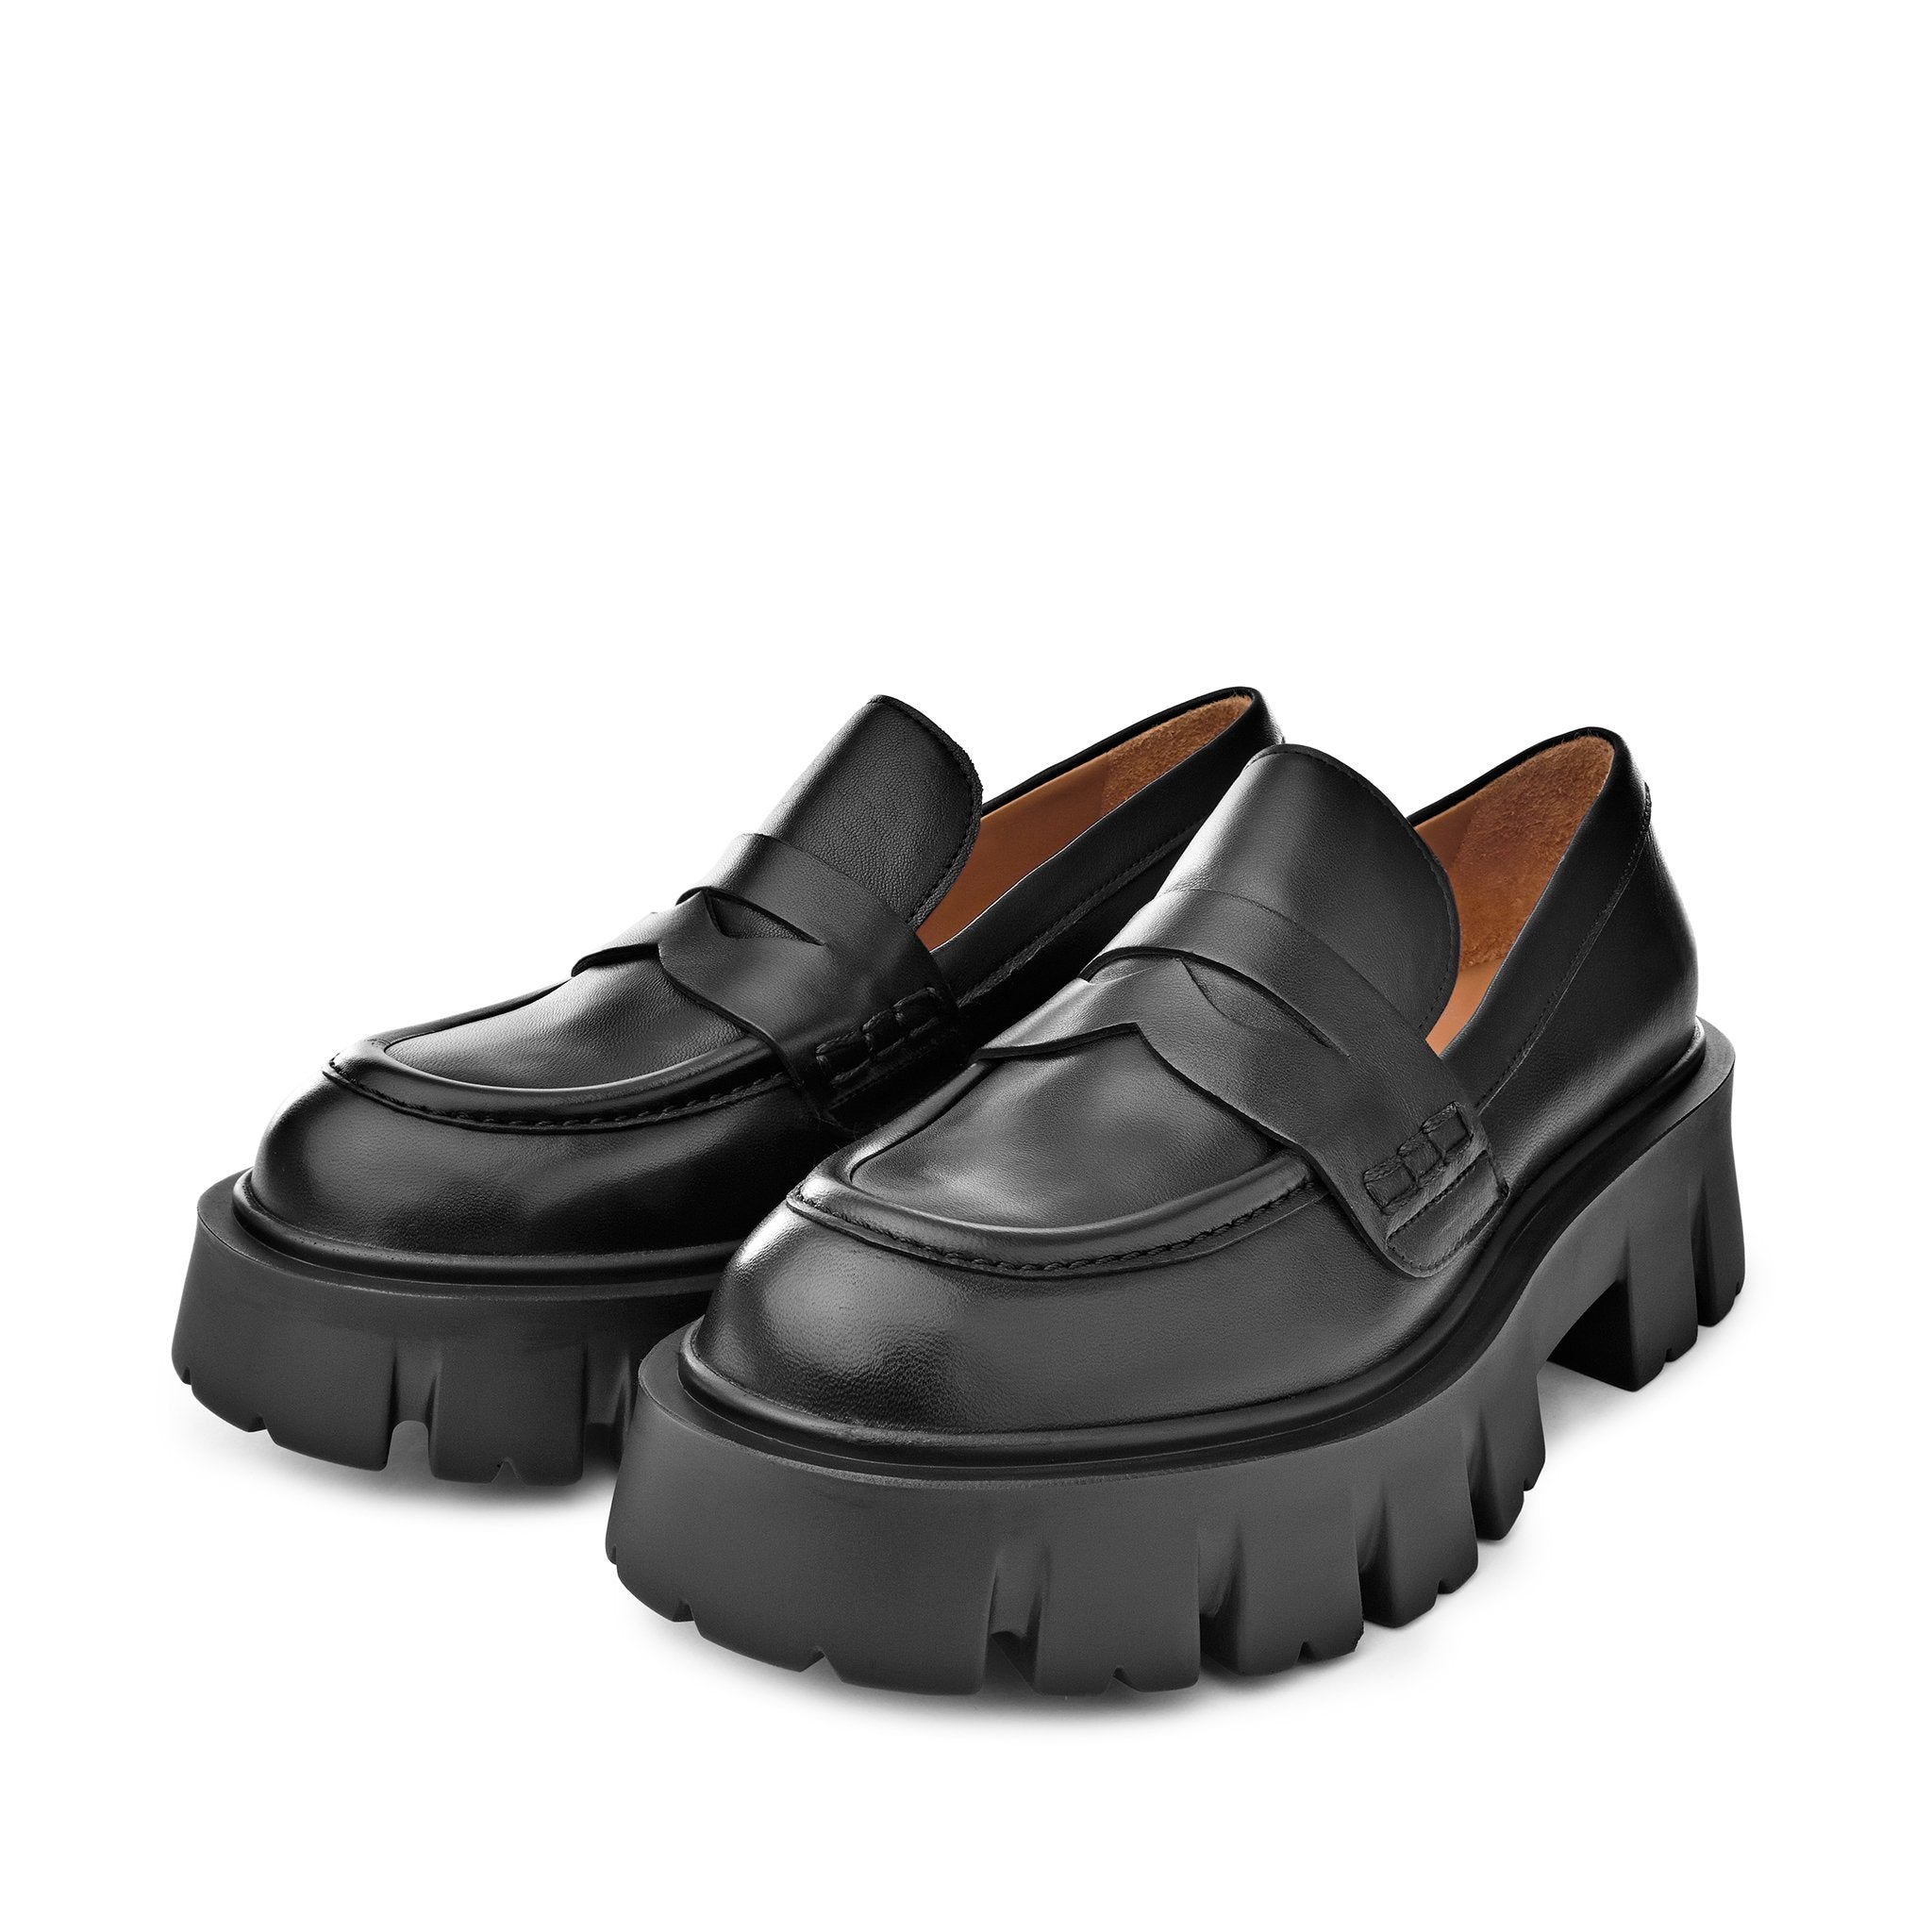 Mikki Black Leather Chunky Loafers D1304Black - 10